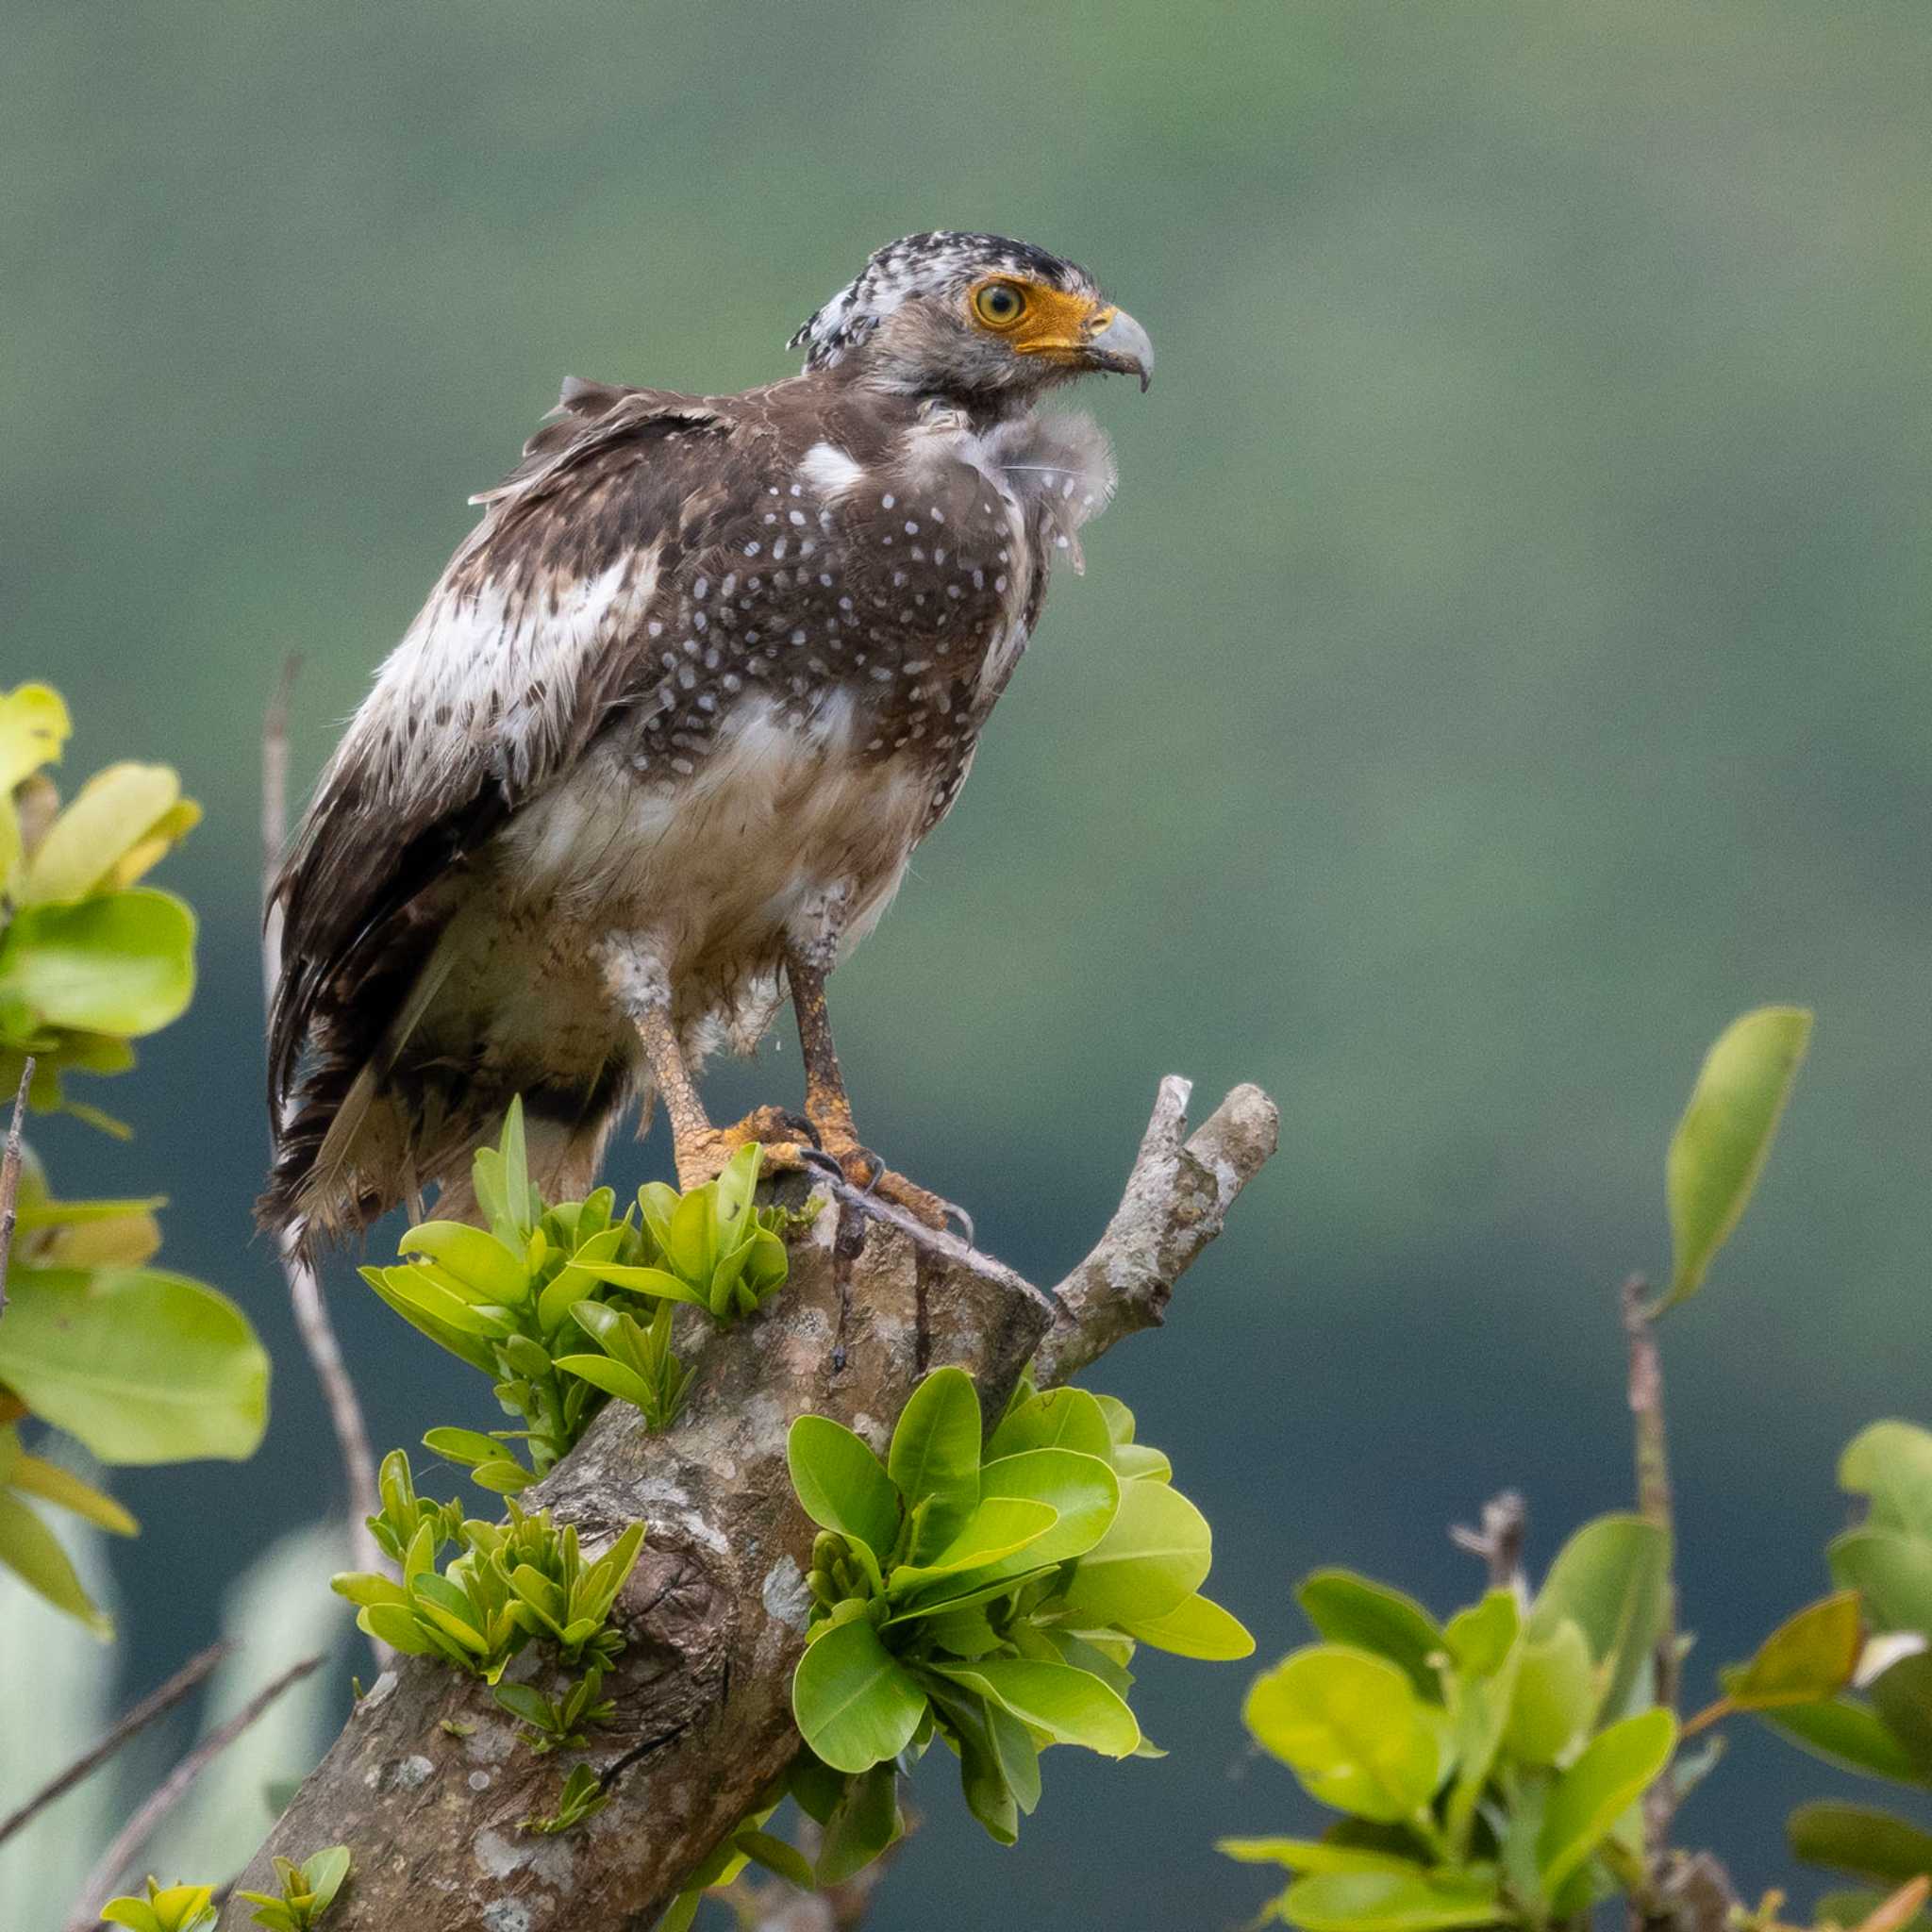 Photo of Crested Serpent Eagle at Ishigaki Island by 石垣島バードウオッチングガイドSeaBeans